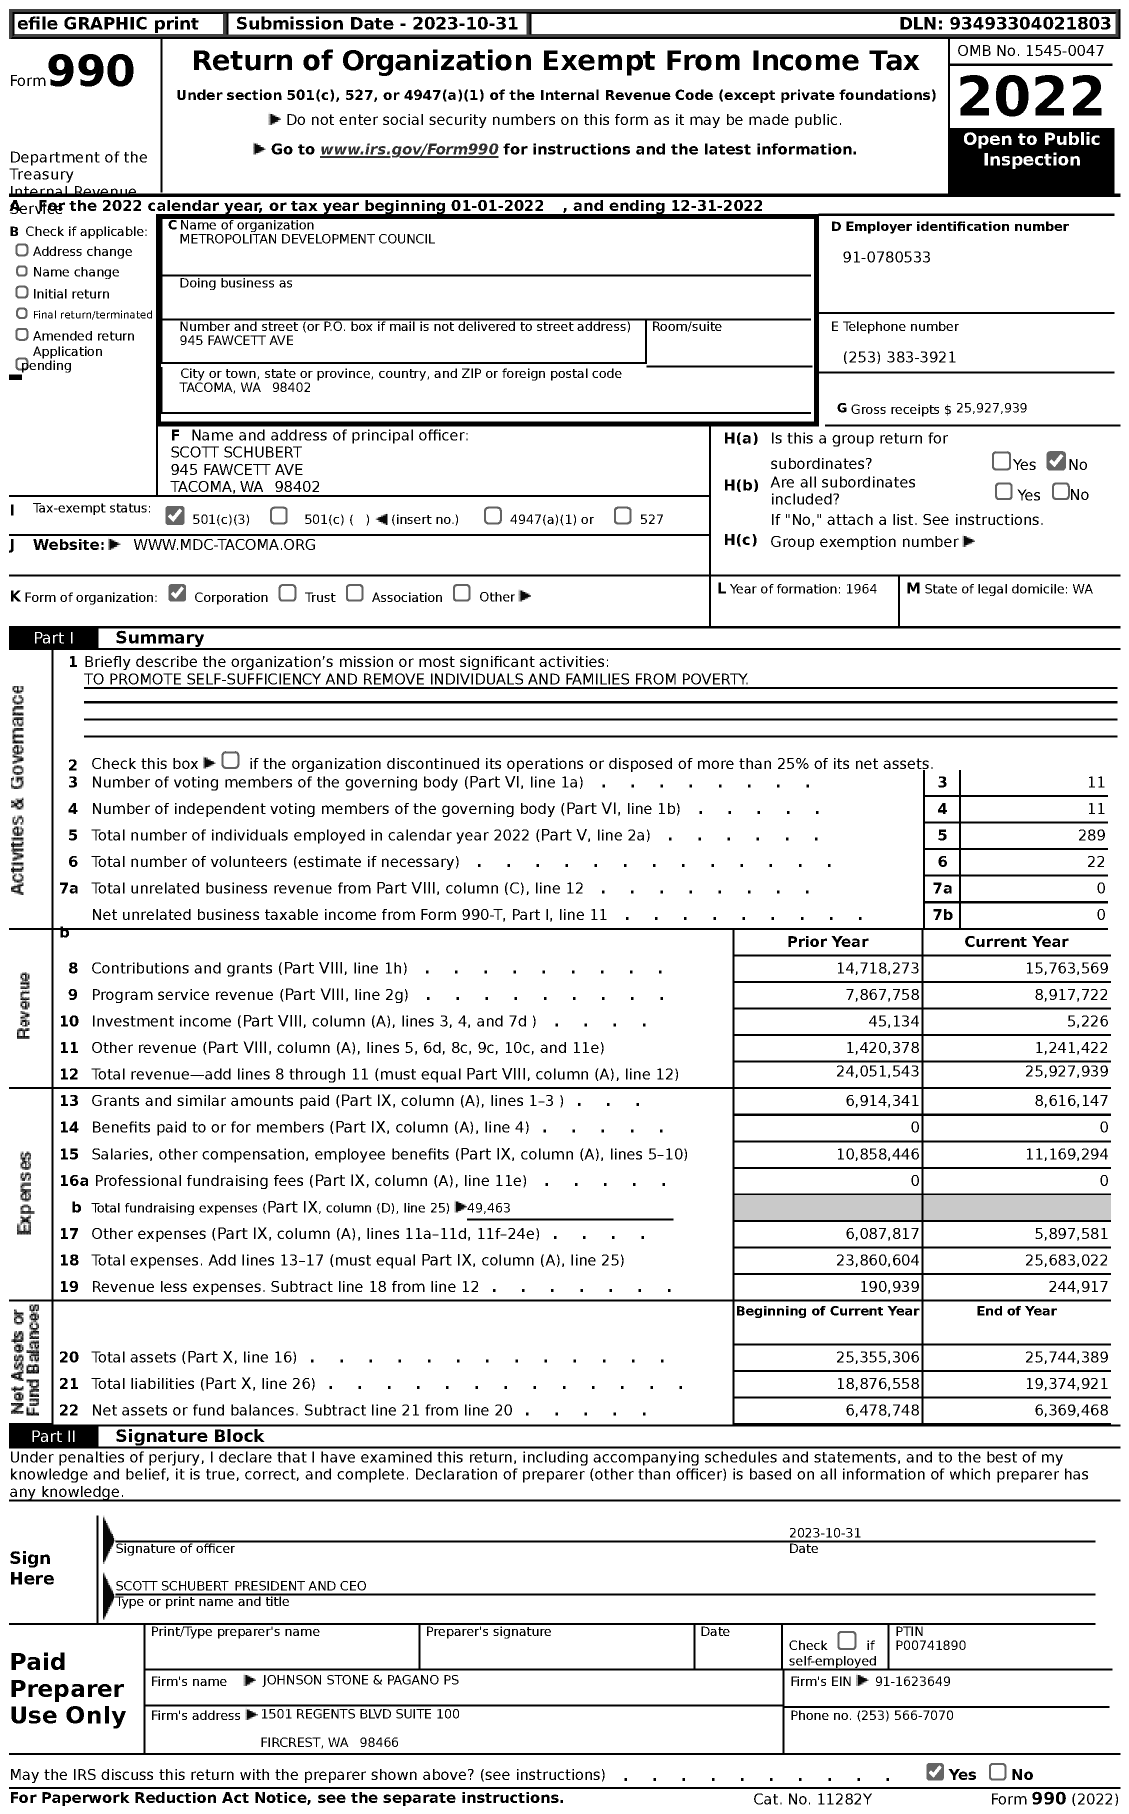 Image of first page of 2022 Form 990 for Metropolitan Development Council (MDC)